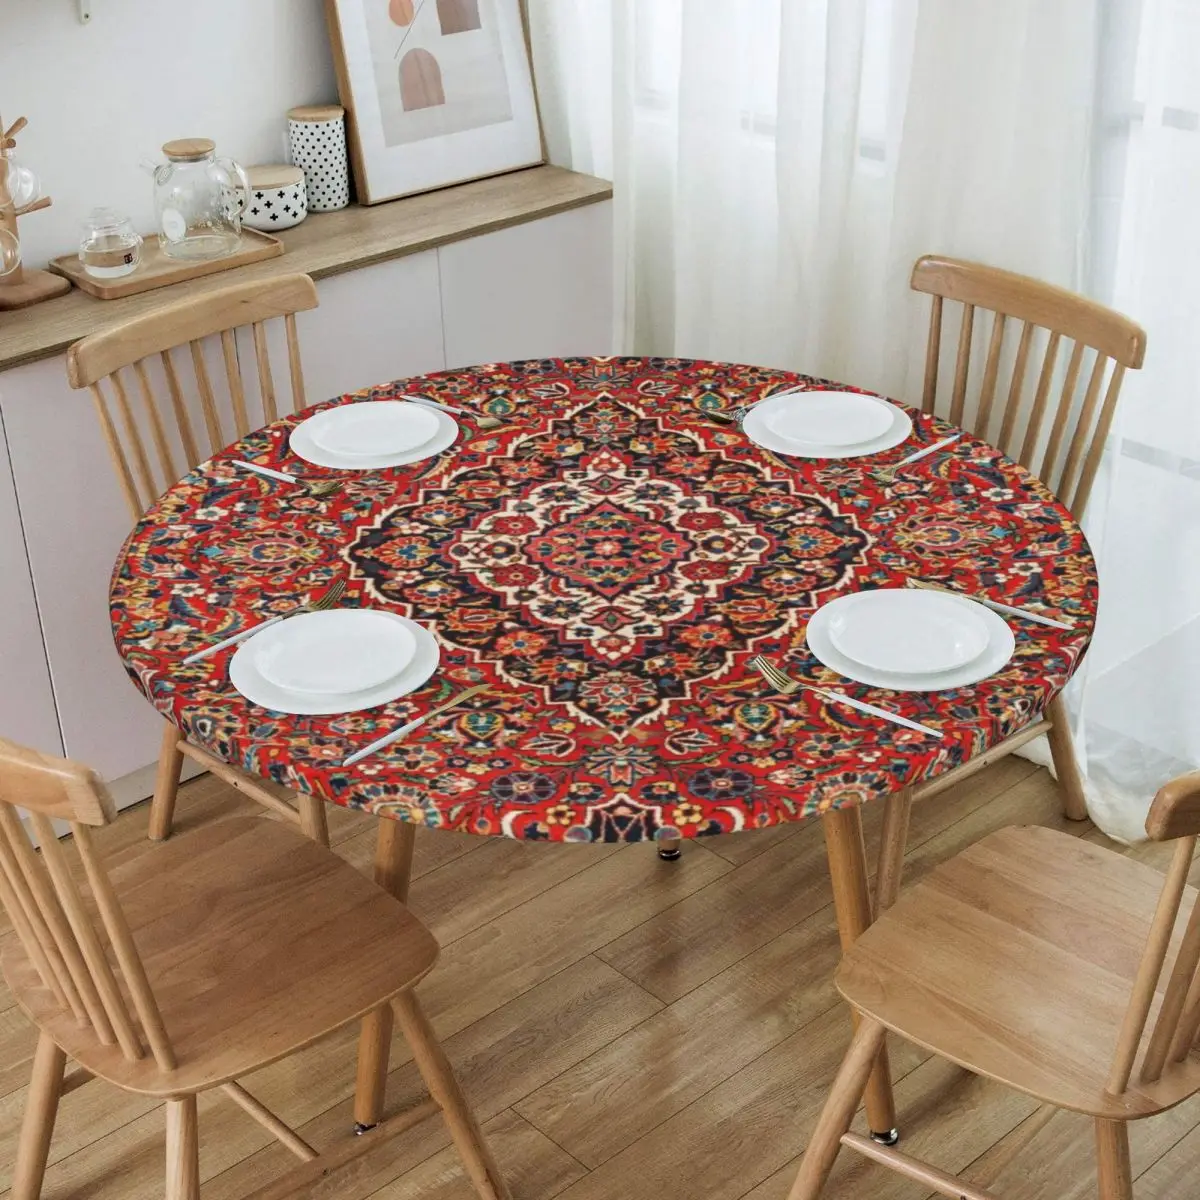 

Kashan Antique Central Persian Rug Tablecloth Round Fitted Waterproof Boho European French Aubusson Table Cloth Cover for Party